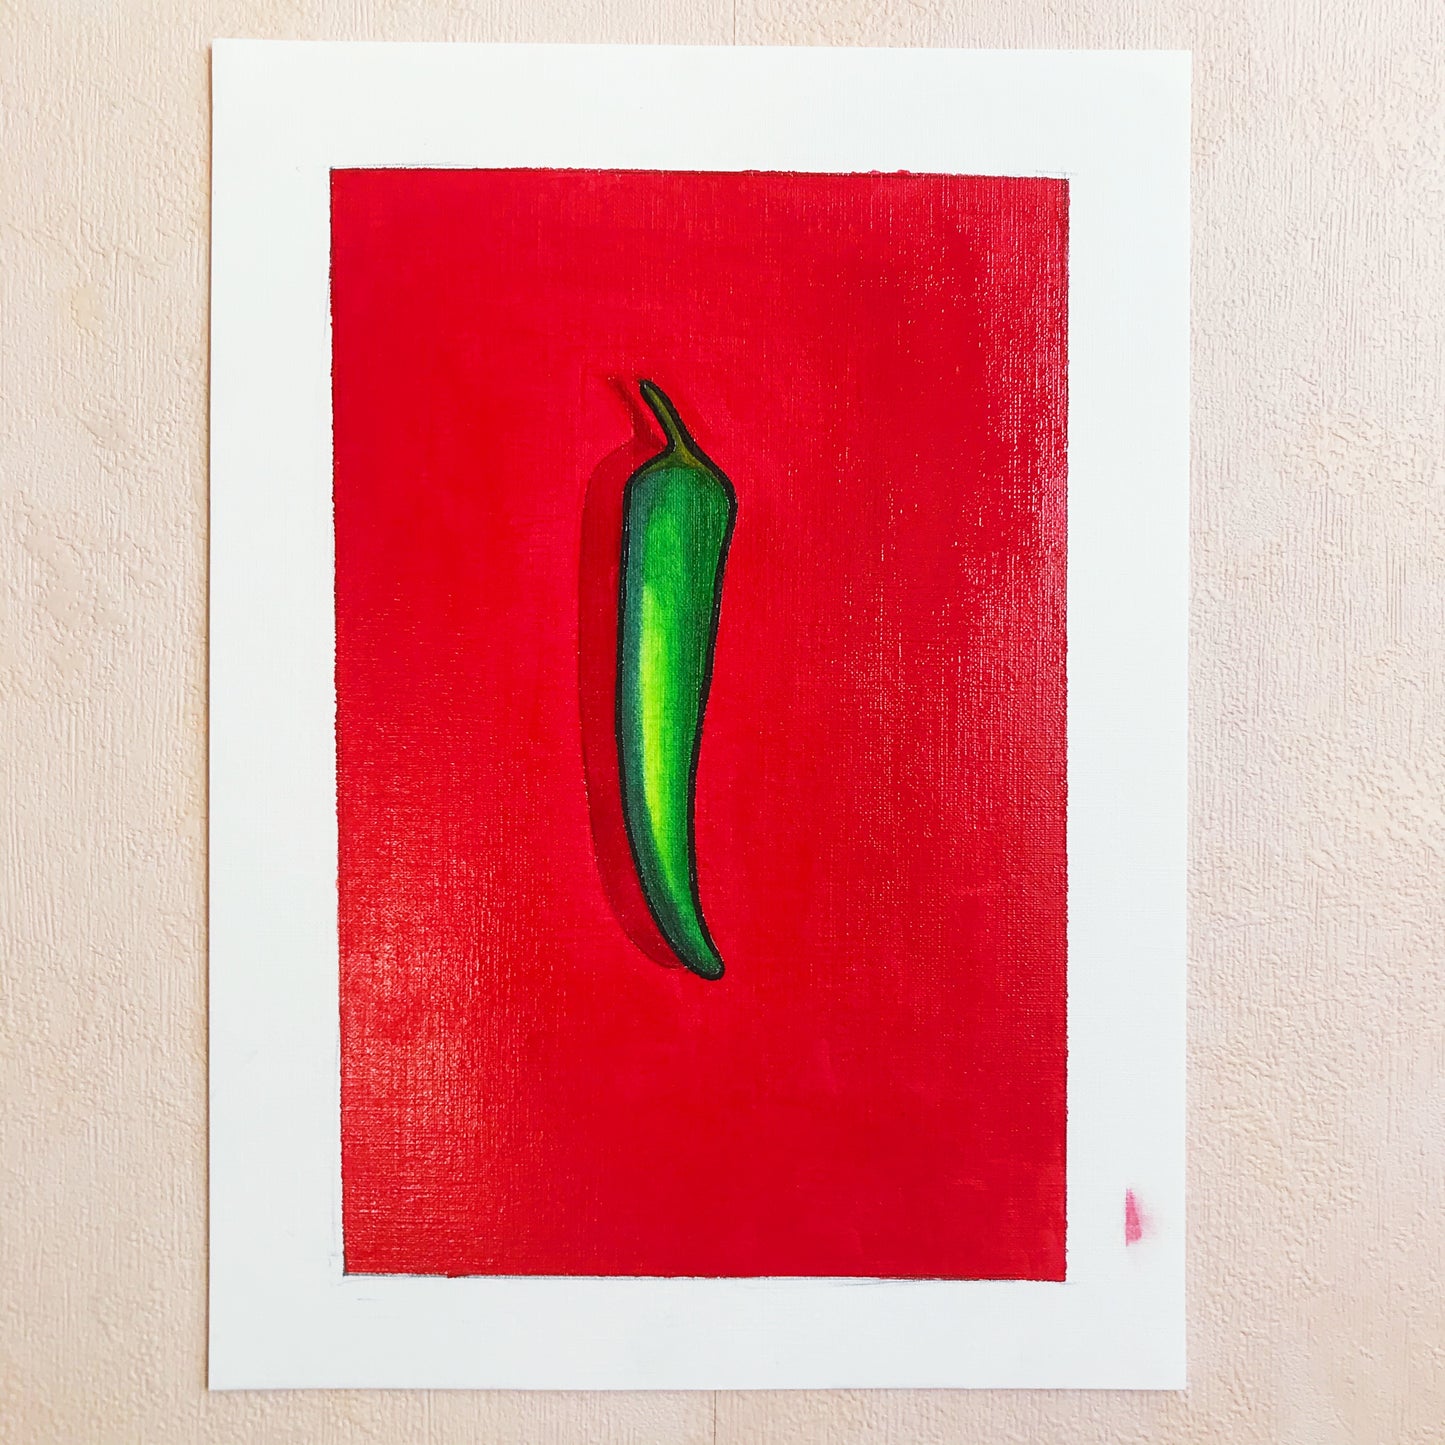 An oil painting of a green chili on a red background